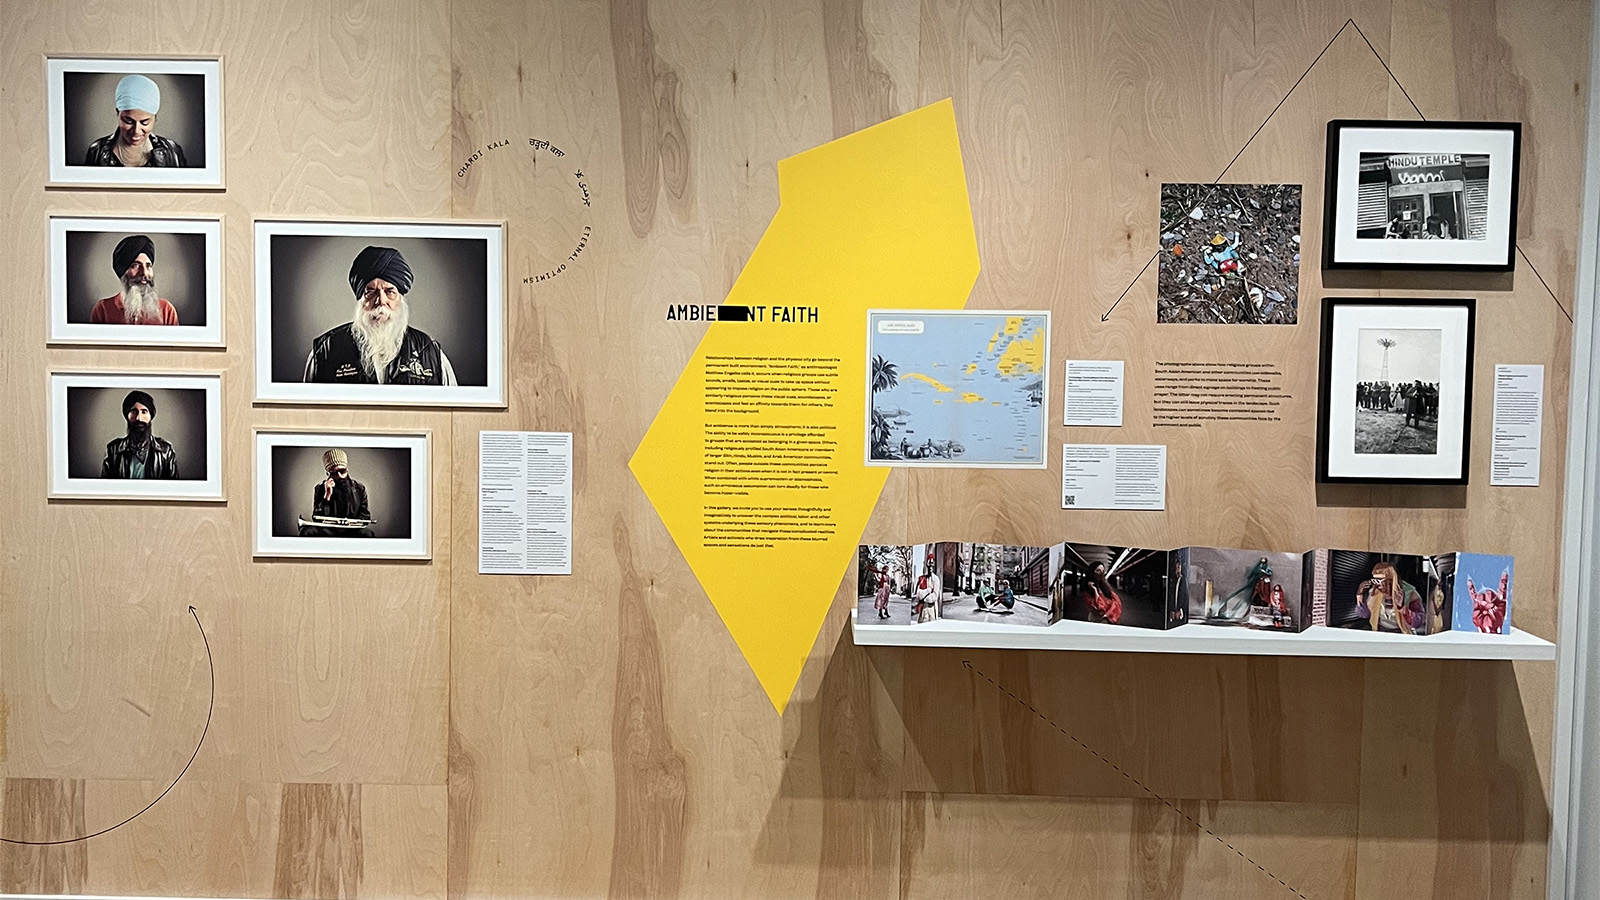 “City of Faith: Religion, Activism, and Urban Space" is a new exhibit at the Museum of the City of New York. RNS photo by Kathryn Post